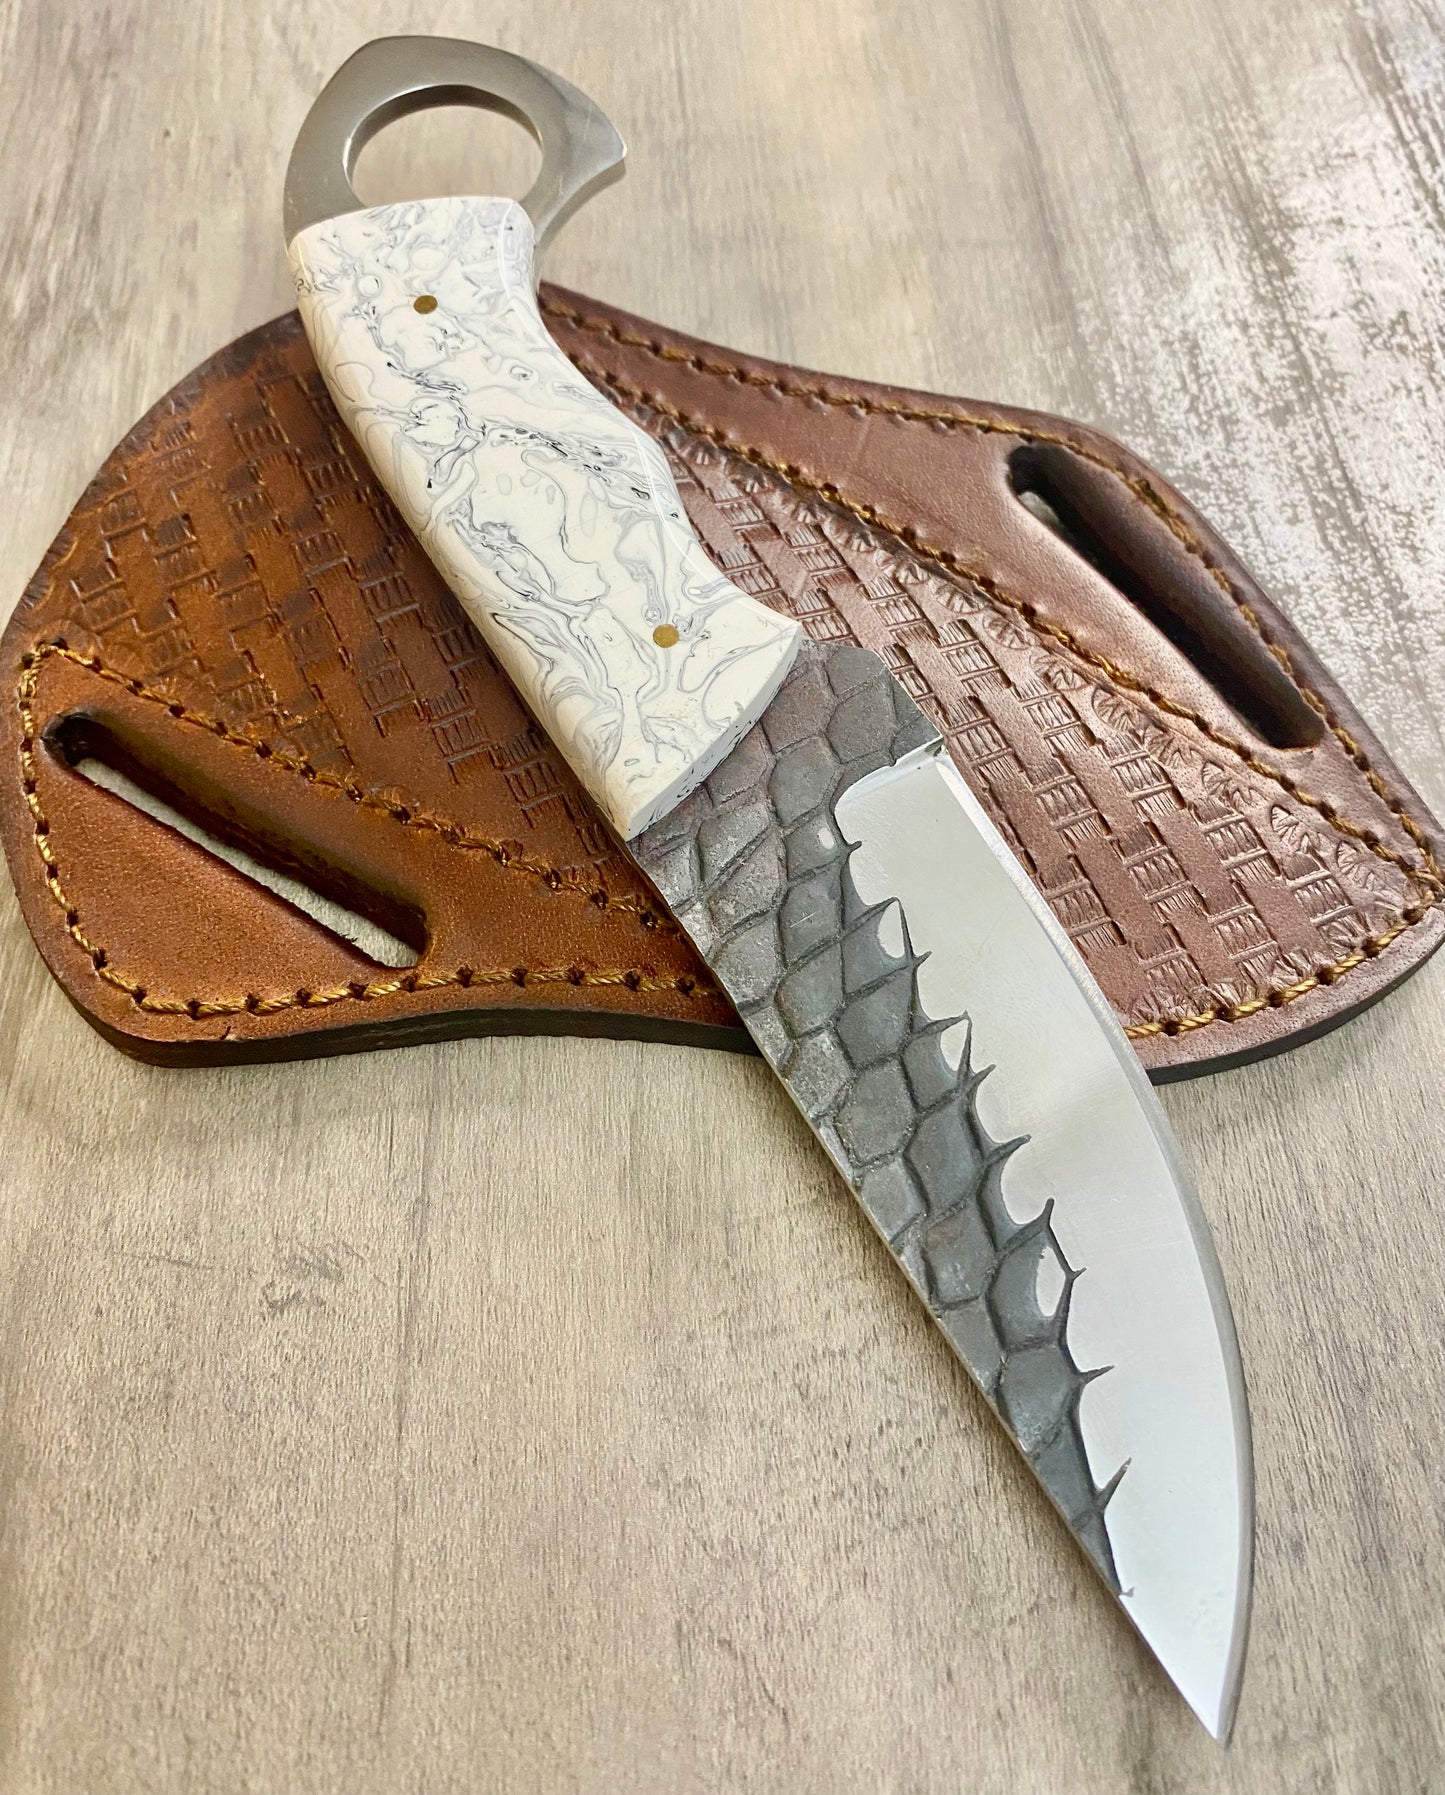 Cowboy bull cutter Knife 8.5 Inches